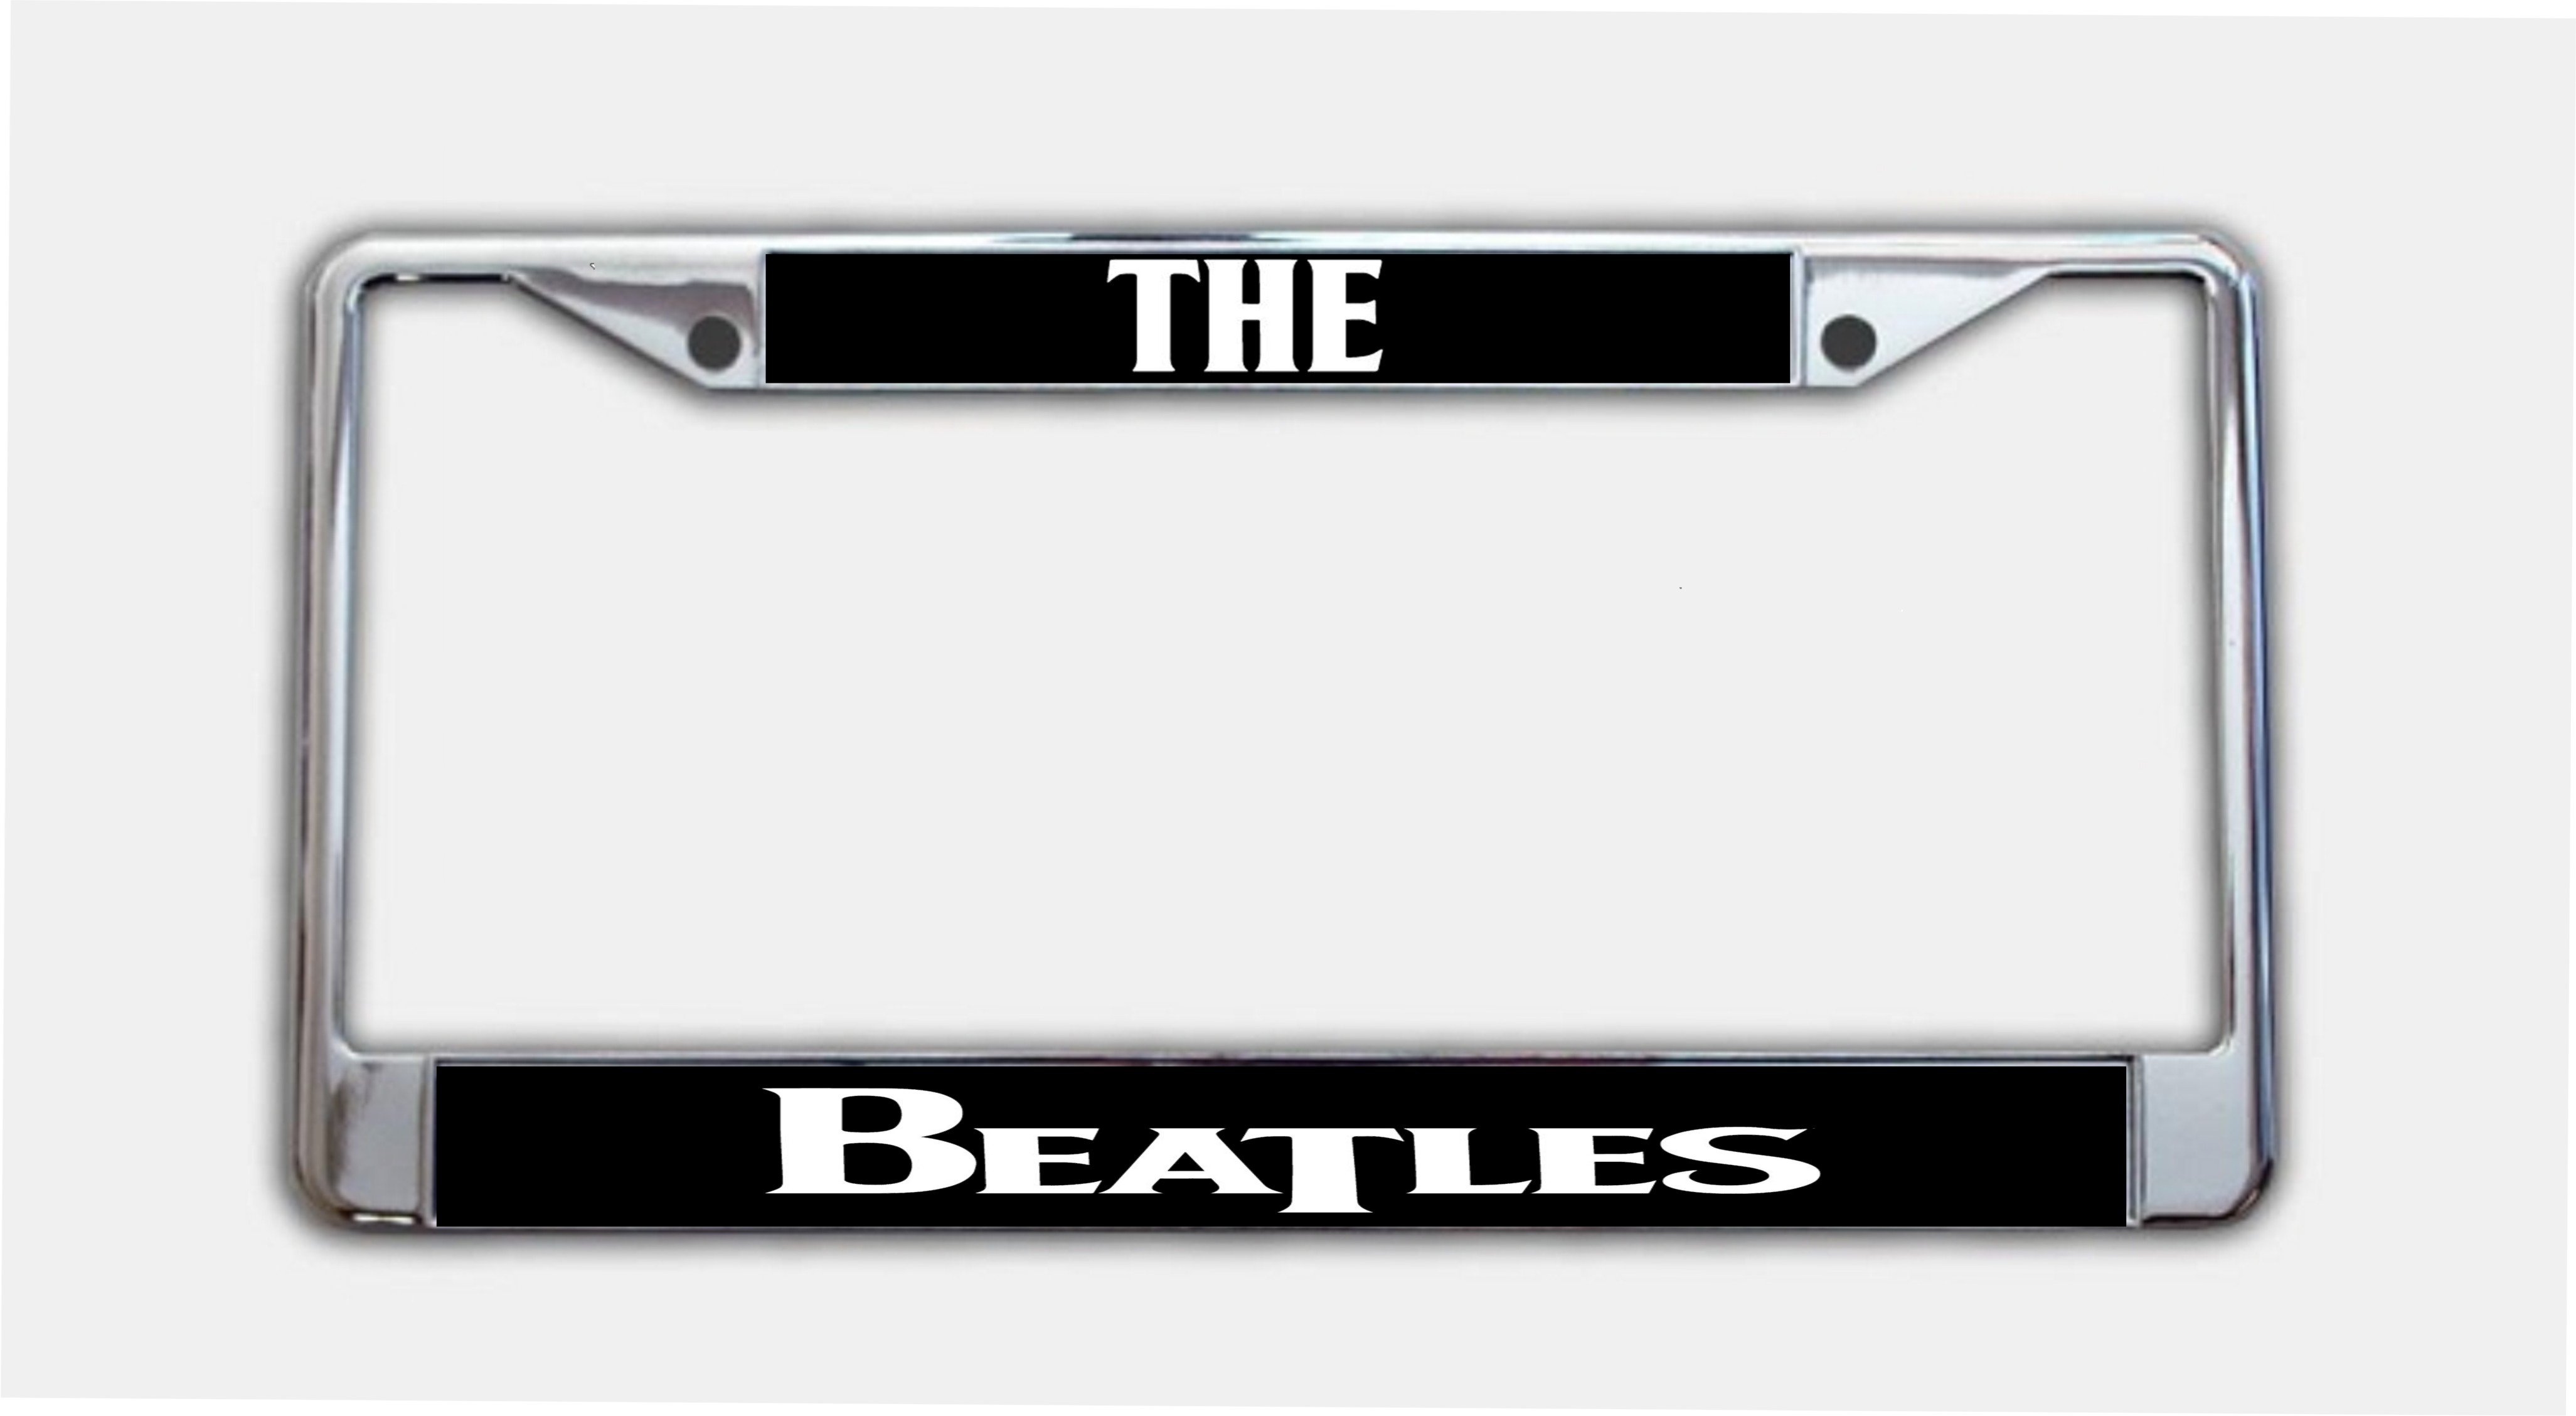 The Beatles Black Photo License Plate Frame  Free SCREW Caps with this Frame